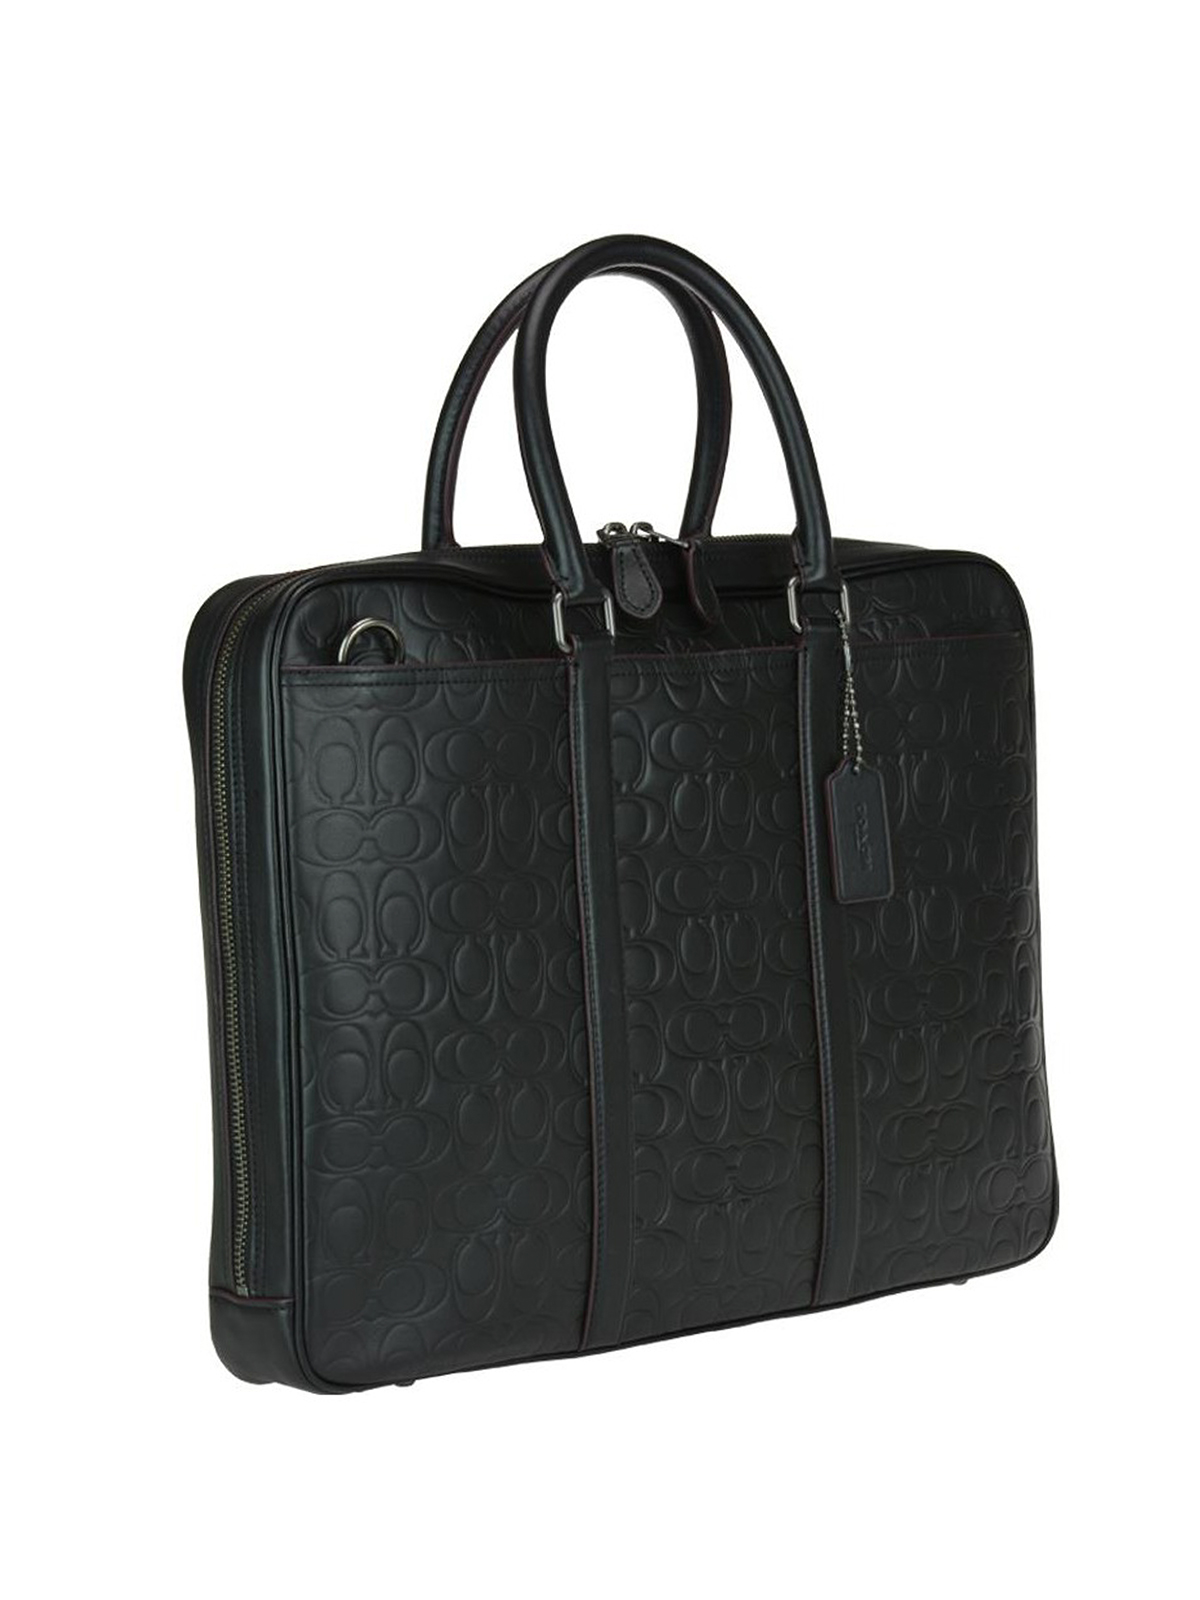 Briefcases & Laptop Bags